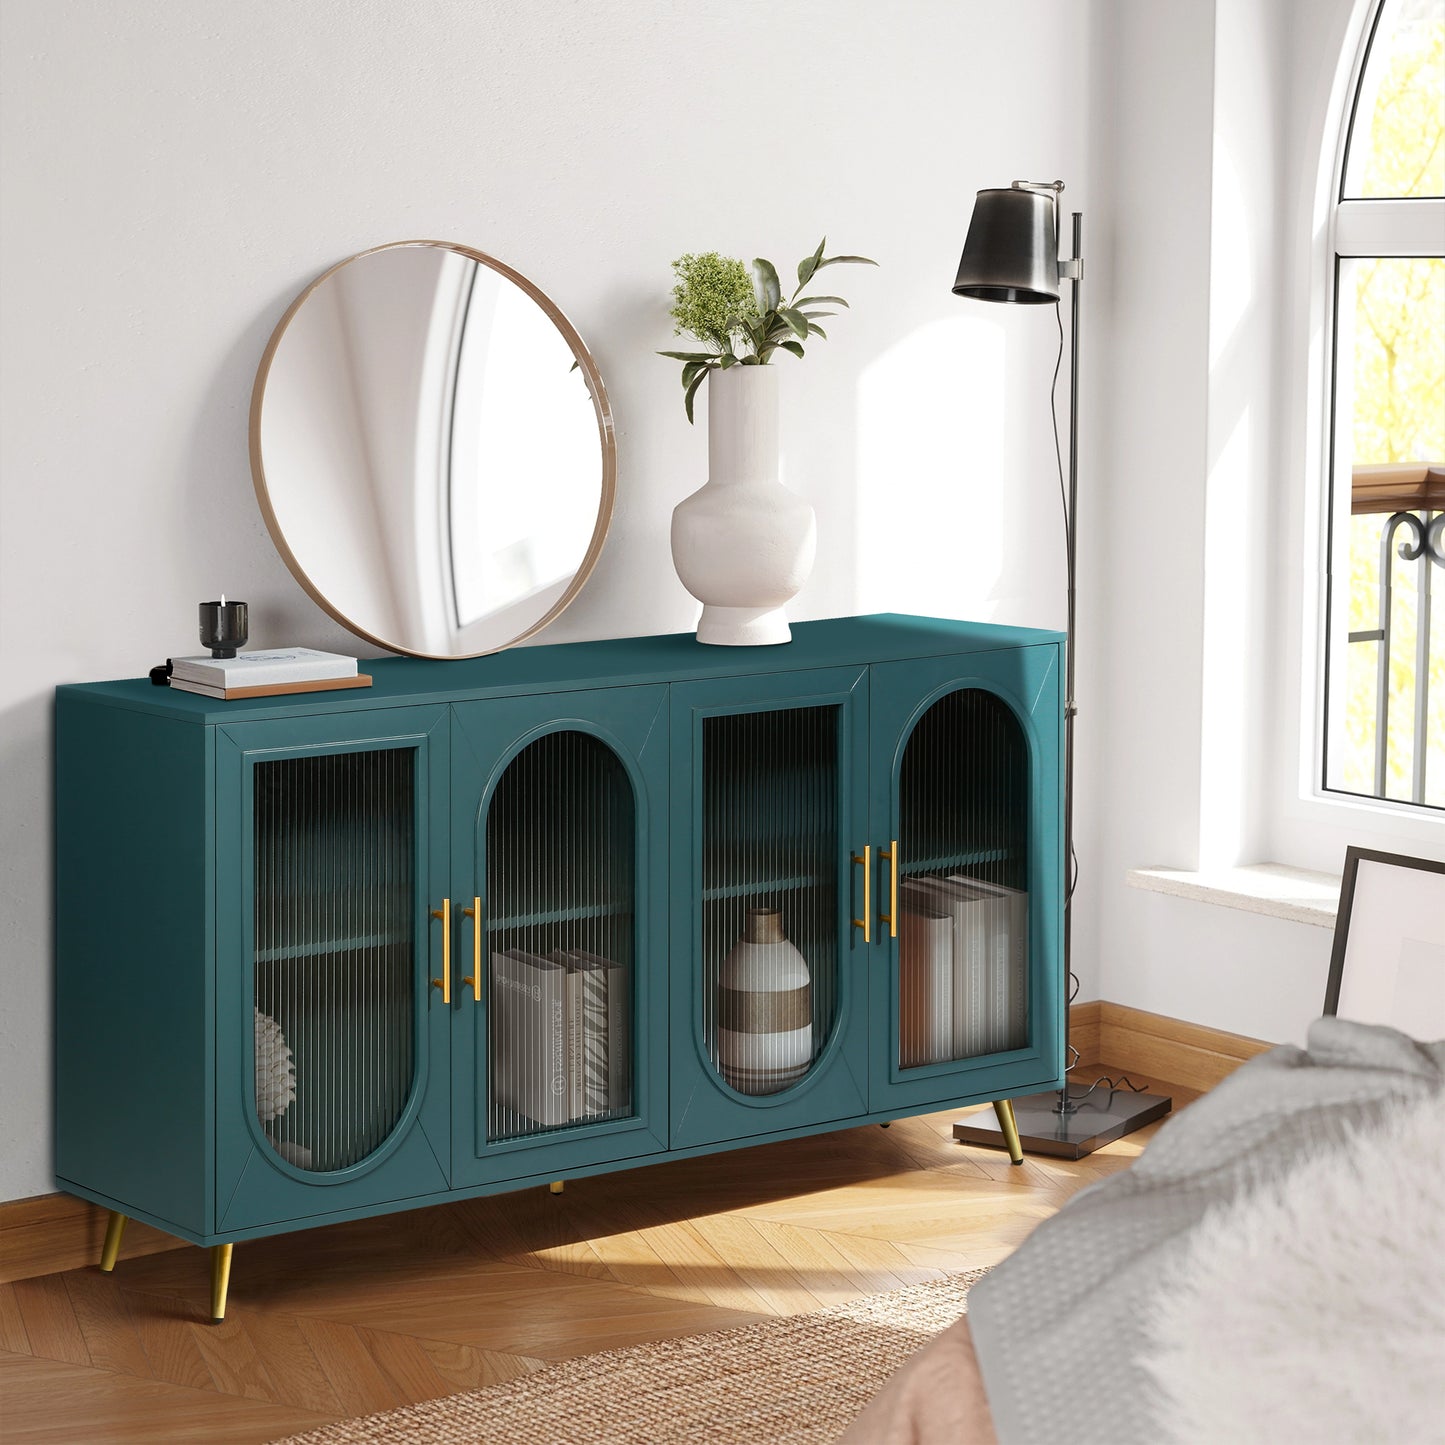 65" Brevy TV Console, Teal